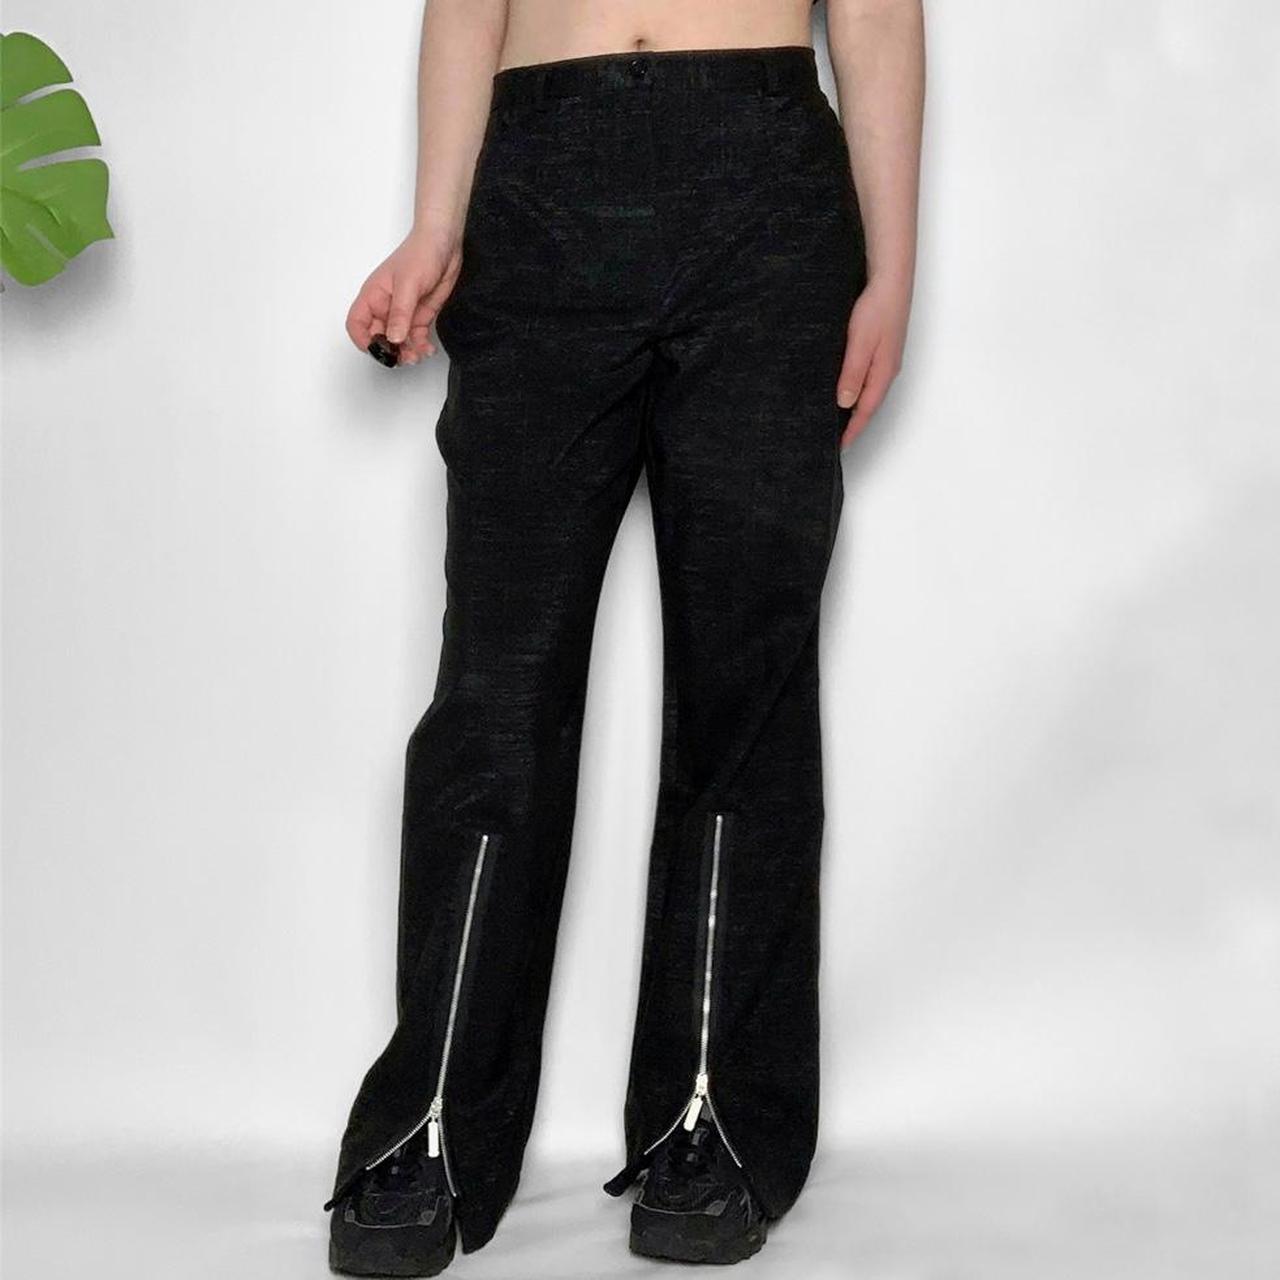 Vintage 90s black stretchy trousers with zip detailing